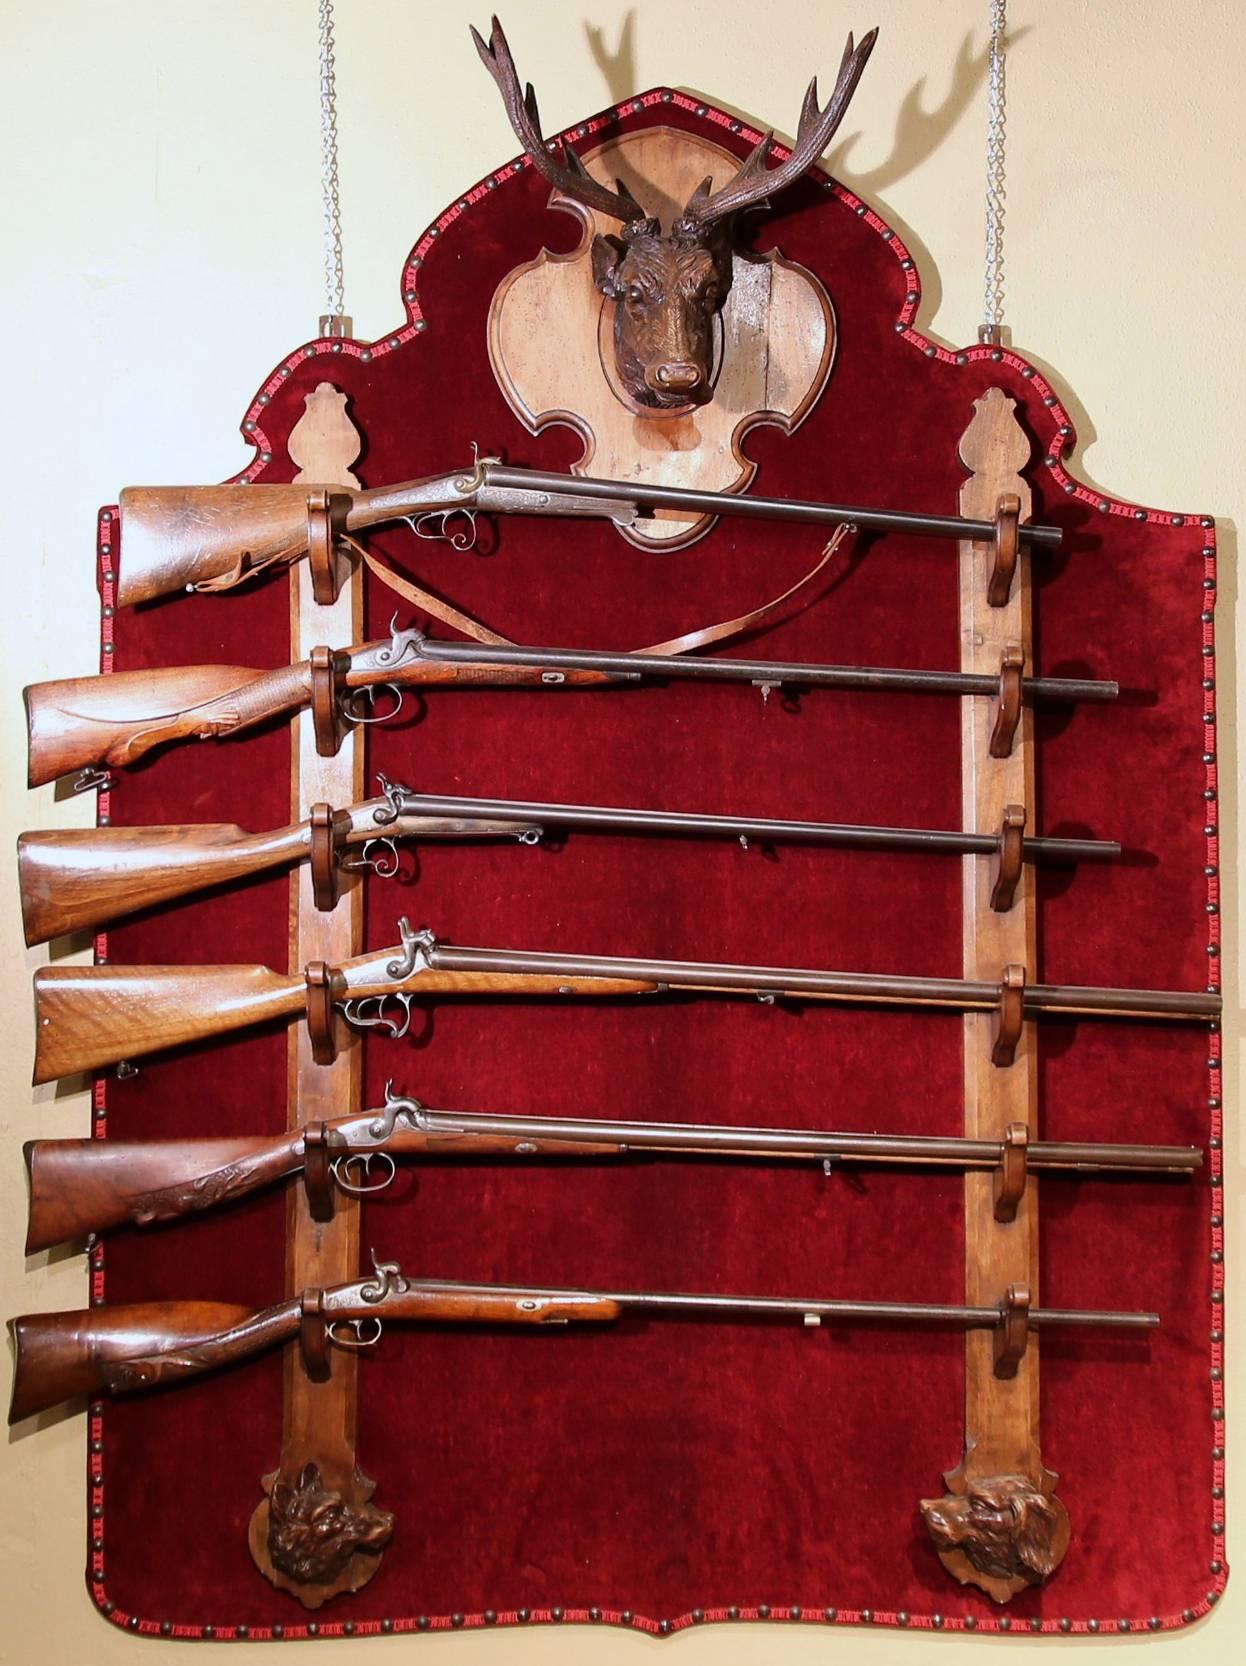 Grand antique gun display rack (or pool cue holder) from France or Switzerland, circa 1880. The shaped wall-mounted shelf will hold six guns; it features a nicely carved deer trophy with antlers on top and a pair of wood carved hunting dogs heads at